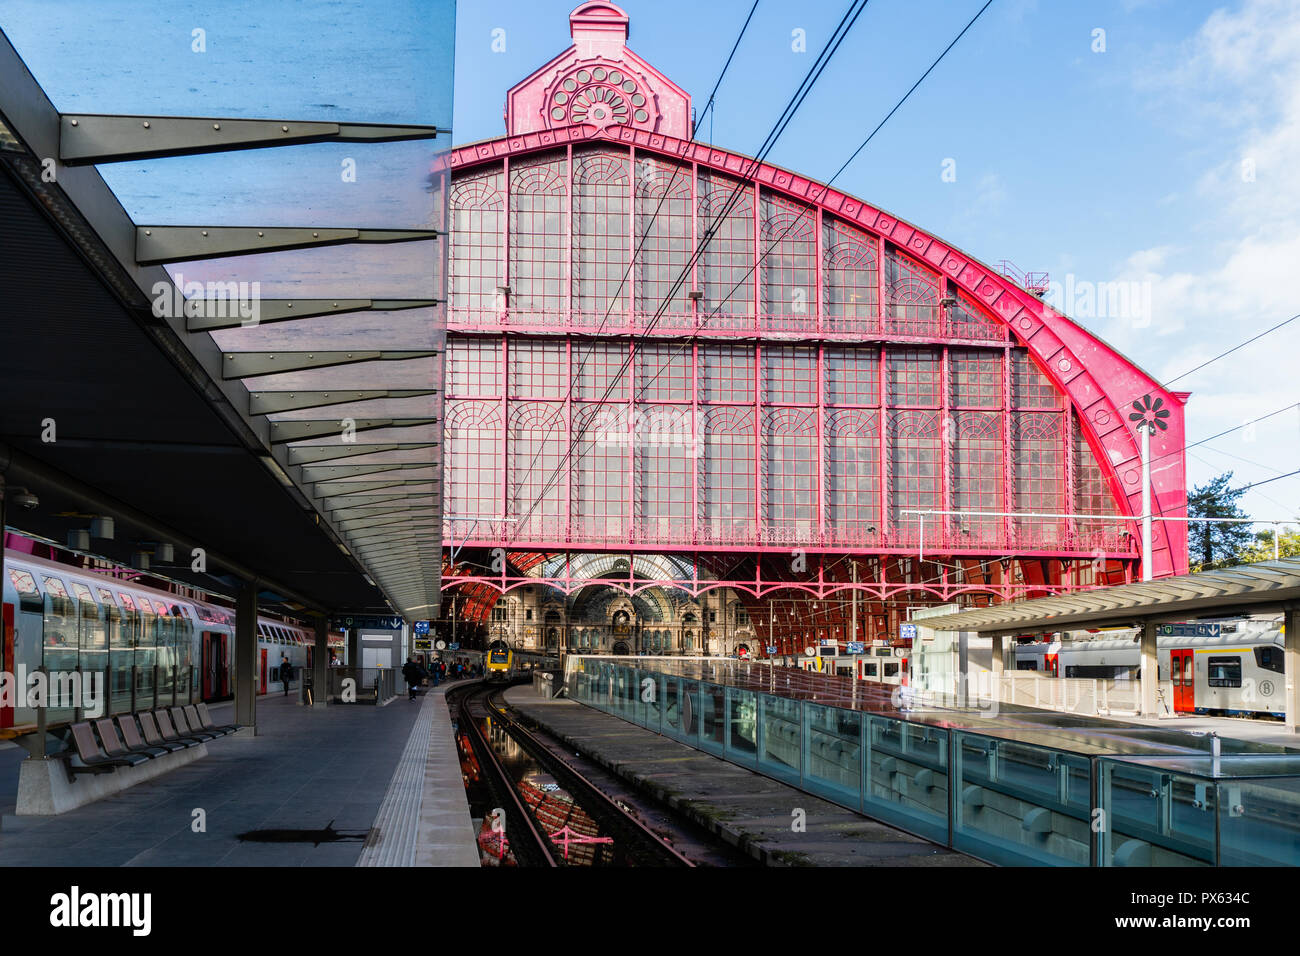 2018-10-01 Antwerp, Belgium: The huge glass vault of the train hall of Antwerp Central Railway Station was designed by the architect J. Van Asperen an Stock Photo